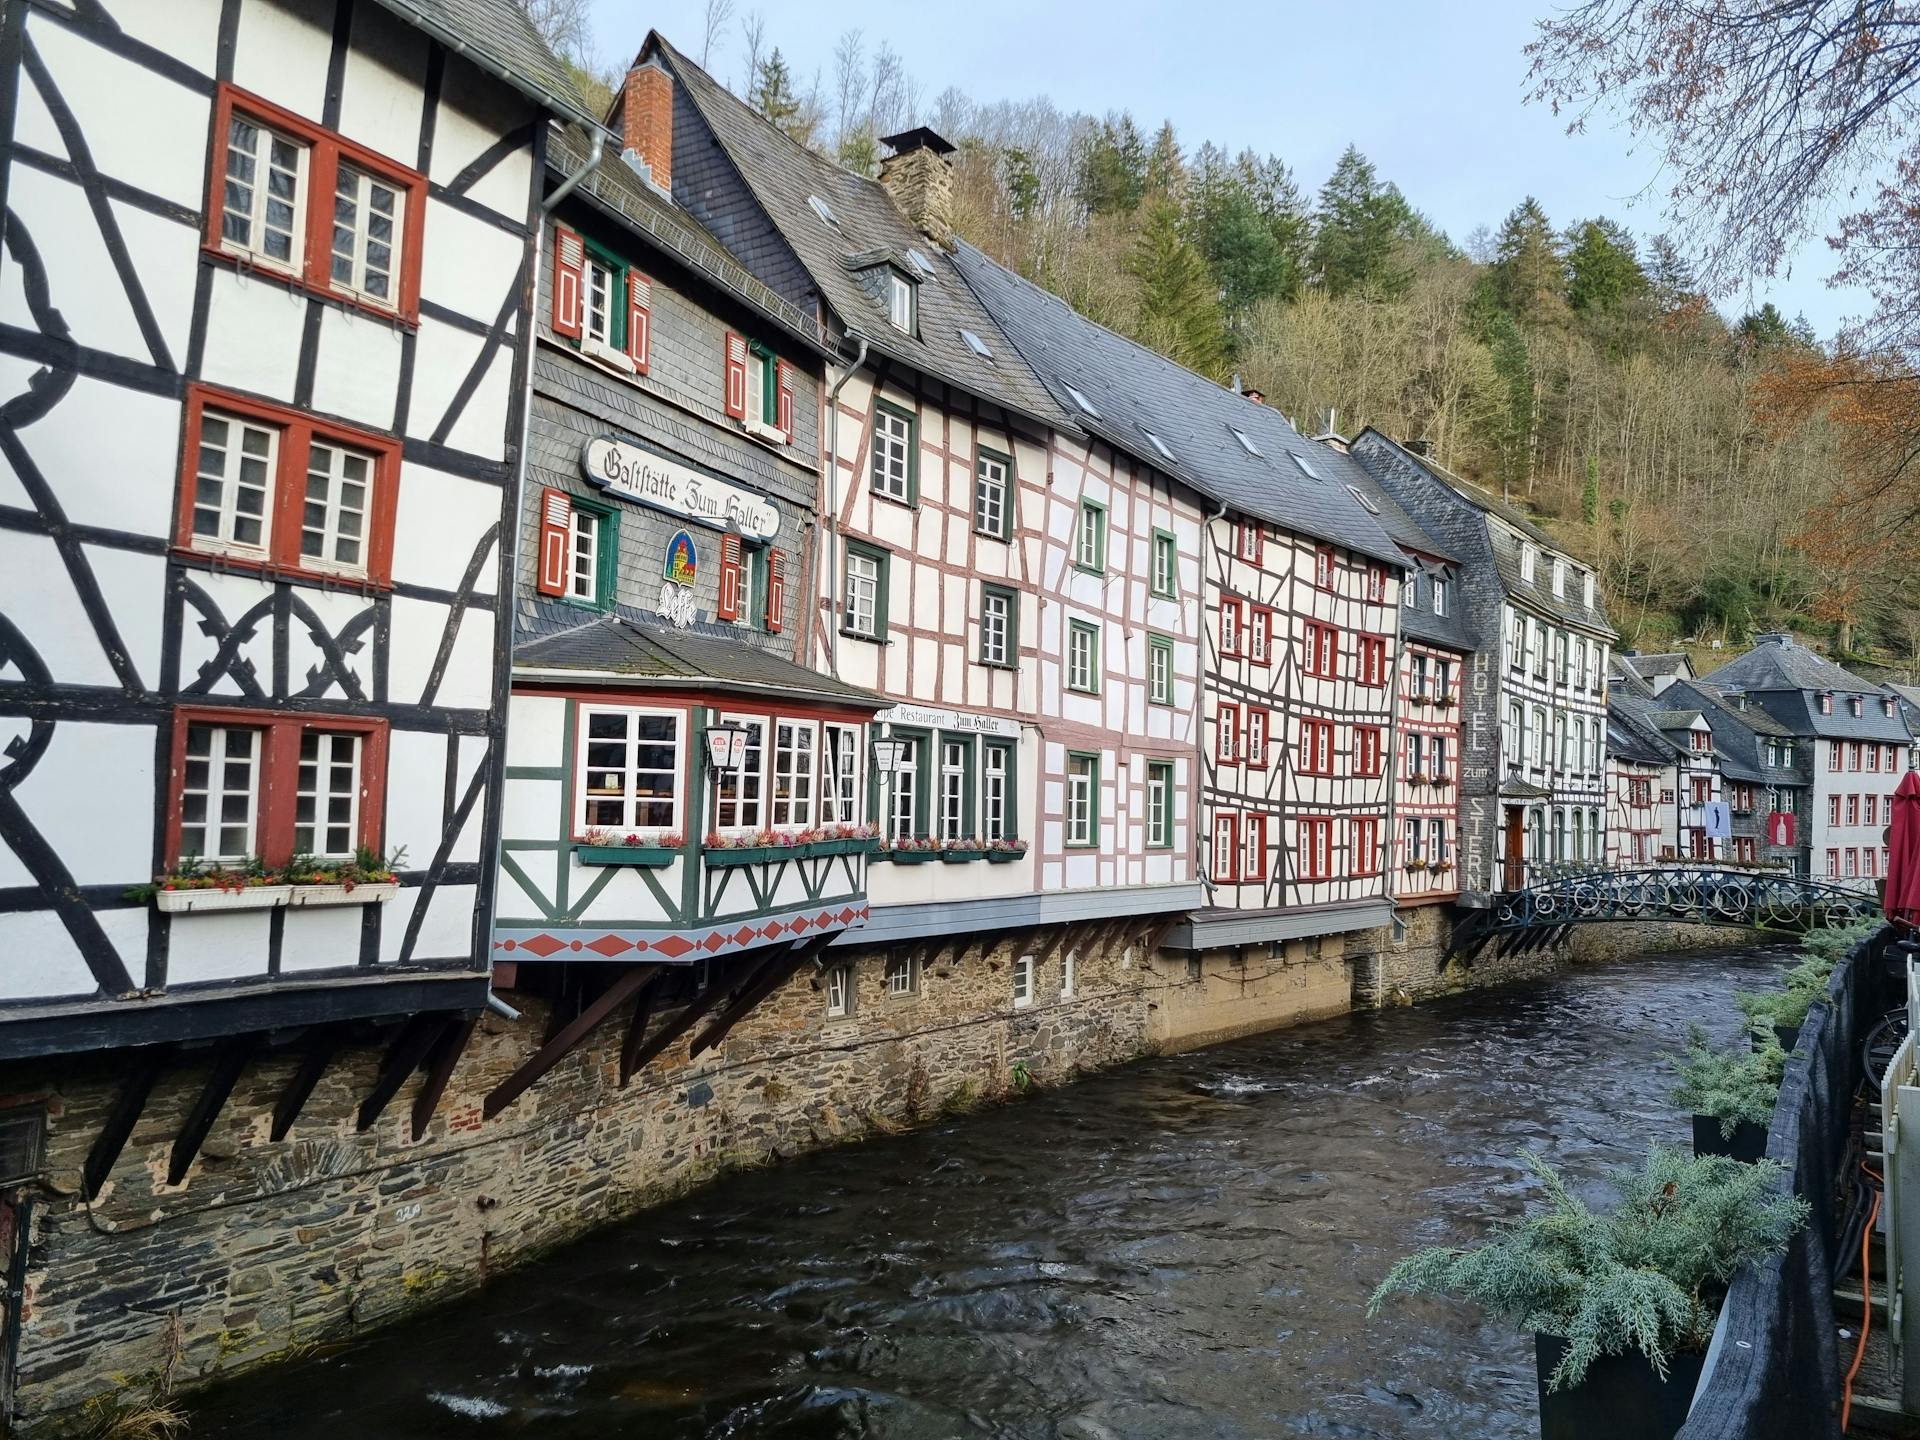 <p>The River Rur is a major river that flows through Belgium, Germany and the Netherlands. It is a tributary of the Meuse river and has a length of 164.5 km (102.2 mi). Monschau is a small resort town in the Eifel region of western Germany, located in the narrow valley of the Rur river. </p><p><br></p><p>The town has a historic center with many preserved half-timbered houses and narrow streets that date back to the Middle Ages. The town is also known for its open-air classical music festival at Burg Monschau, a castle that was once a seat of the dukes of Jülich. </p><p><br></p><p>Monschau attracts many tourists with its picturesque views, especially in the warm months 3. The Rur river is also a source of trout and salmon for local fishermen. In 2023, the river experienced a severe flooding that threatened the town of Monschau and its surroundings.</p>